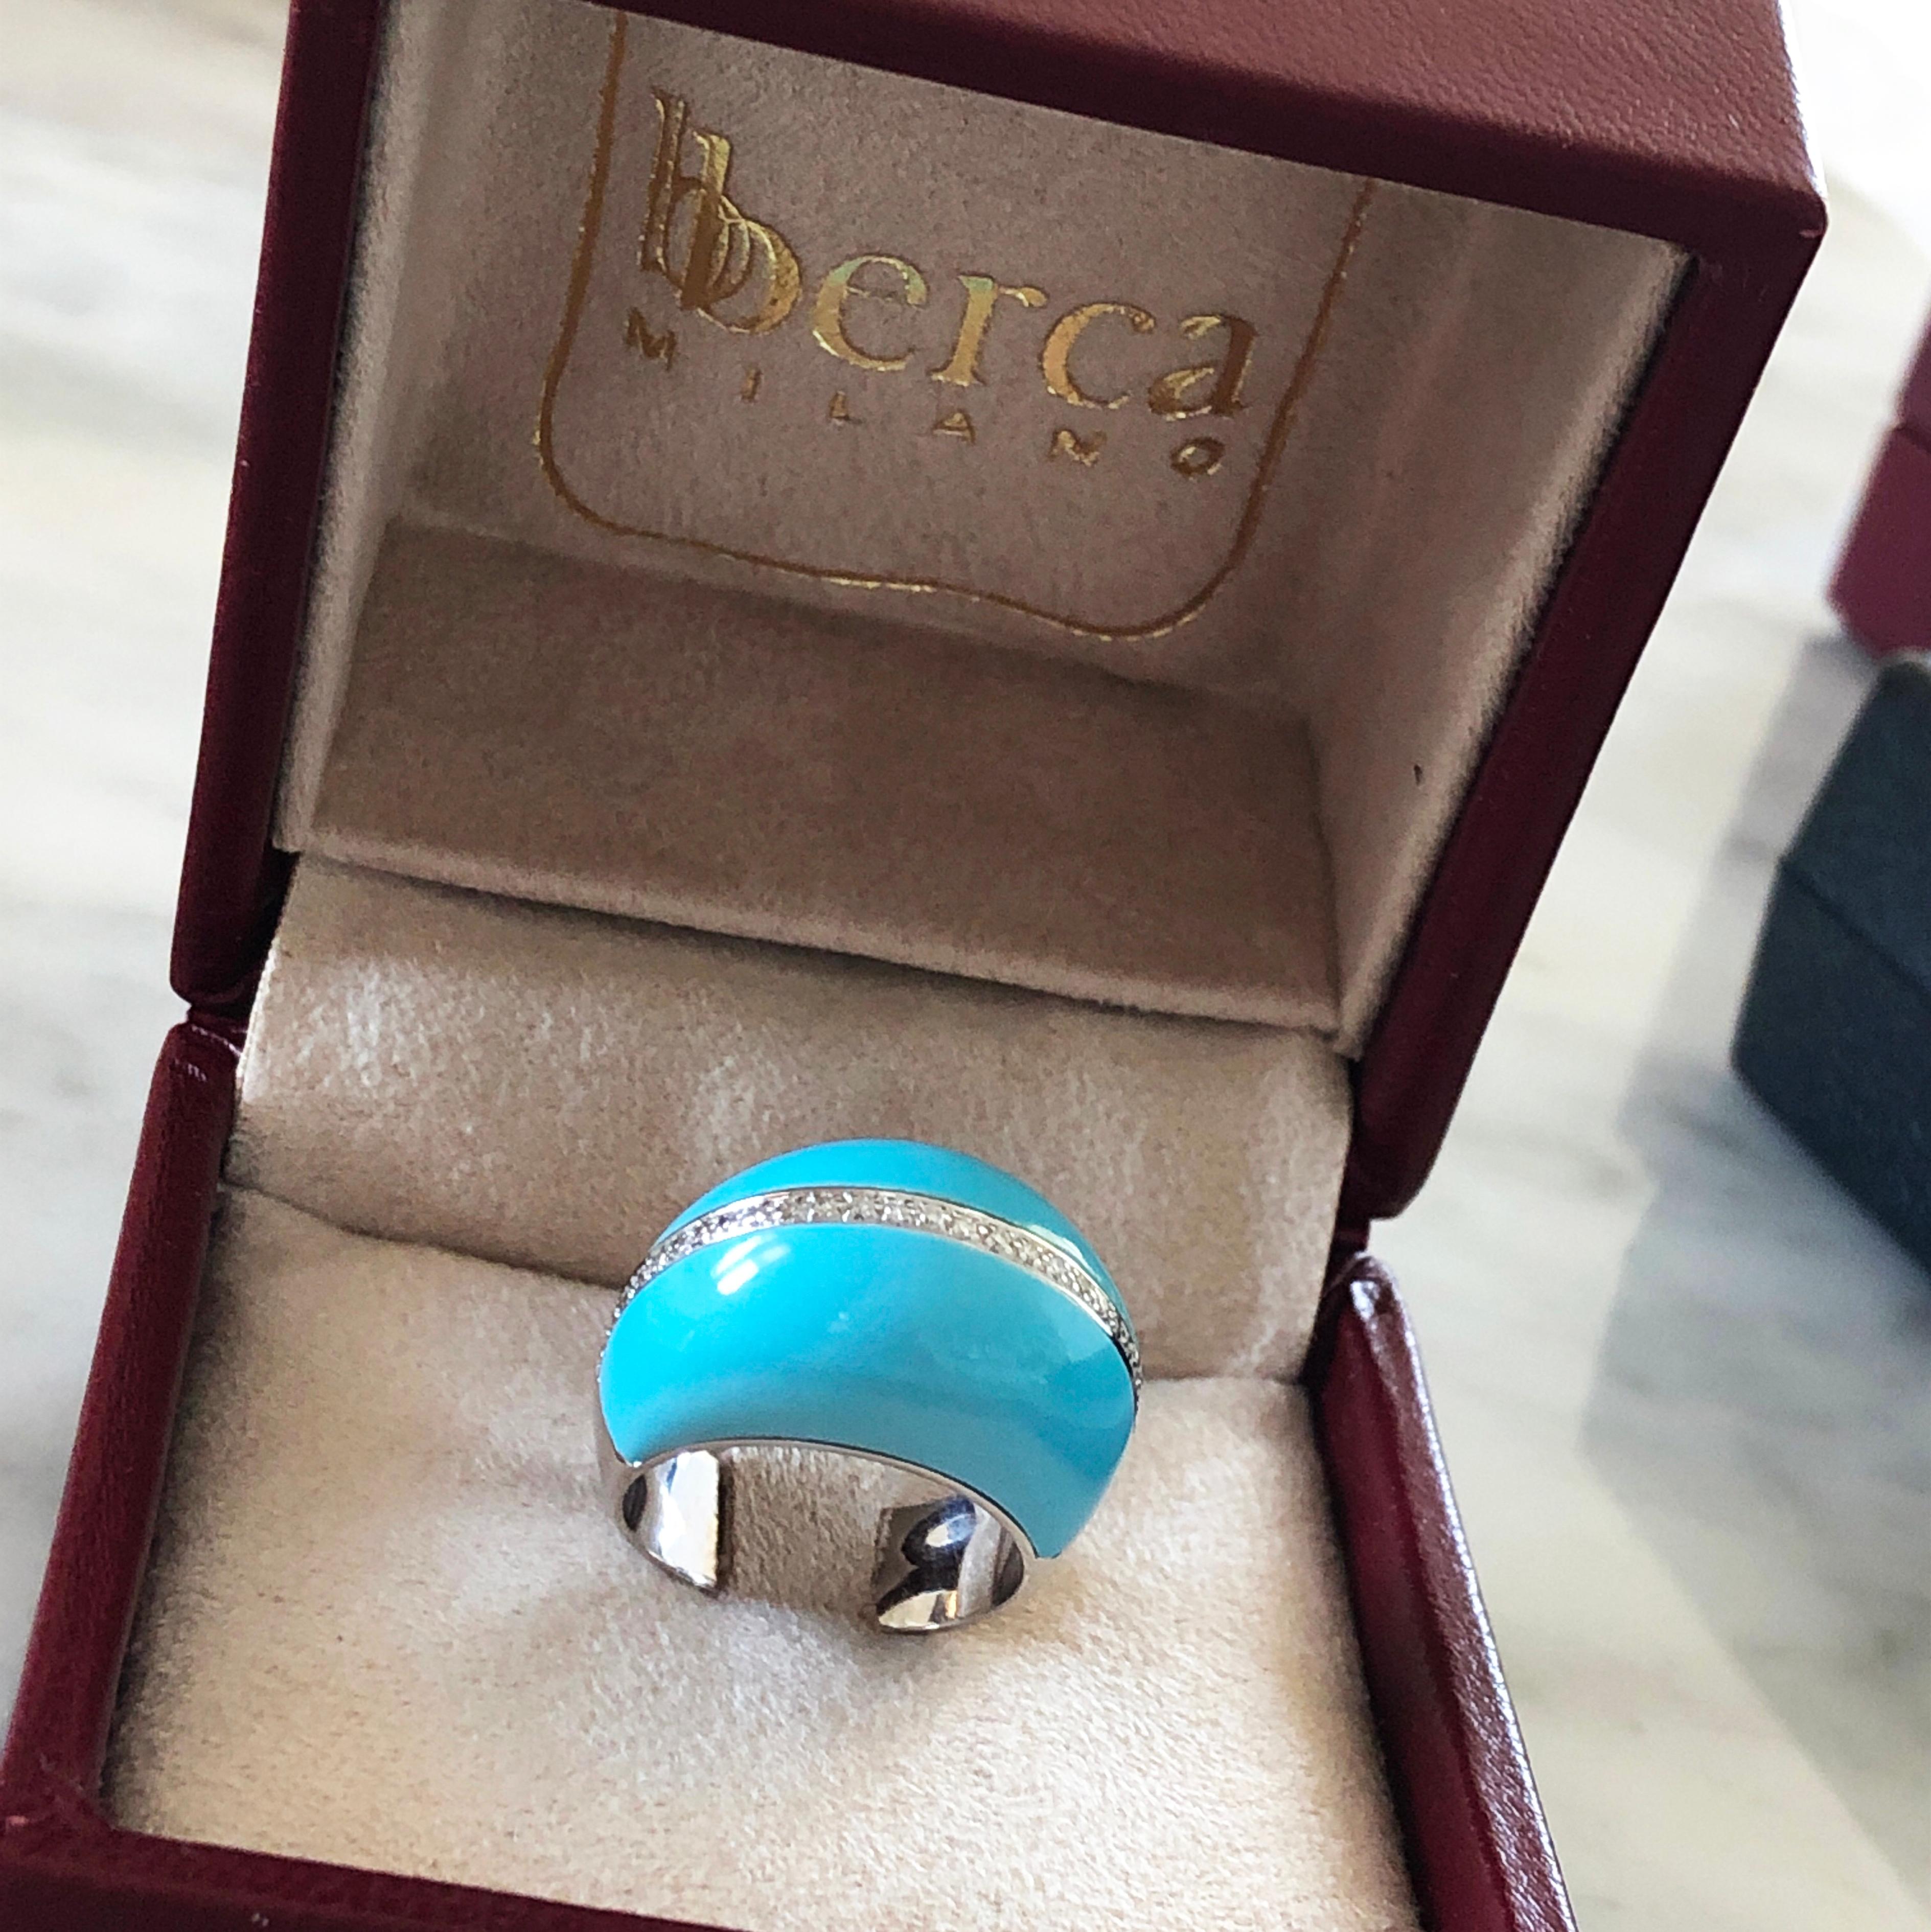 One-of-a-kind, Chic and Timeless Cocktail Ring Featuring 0.30 Carat White Diamond(D-E, IF) in a 21 Carat Natural Beautifully Hand Inlaid Turquoise, Pyramid Shaped, 18k White Gold Setting. 
A matching pair of earrings is available.
Turquoise has